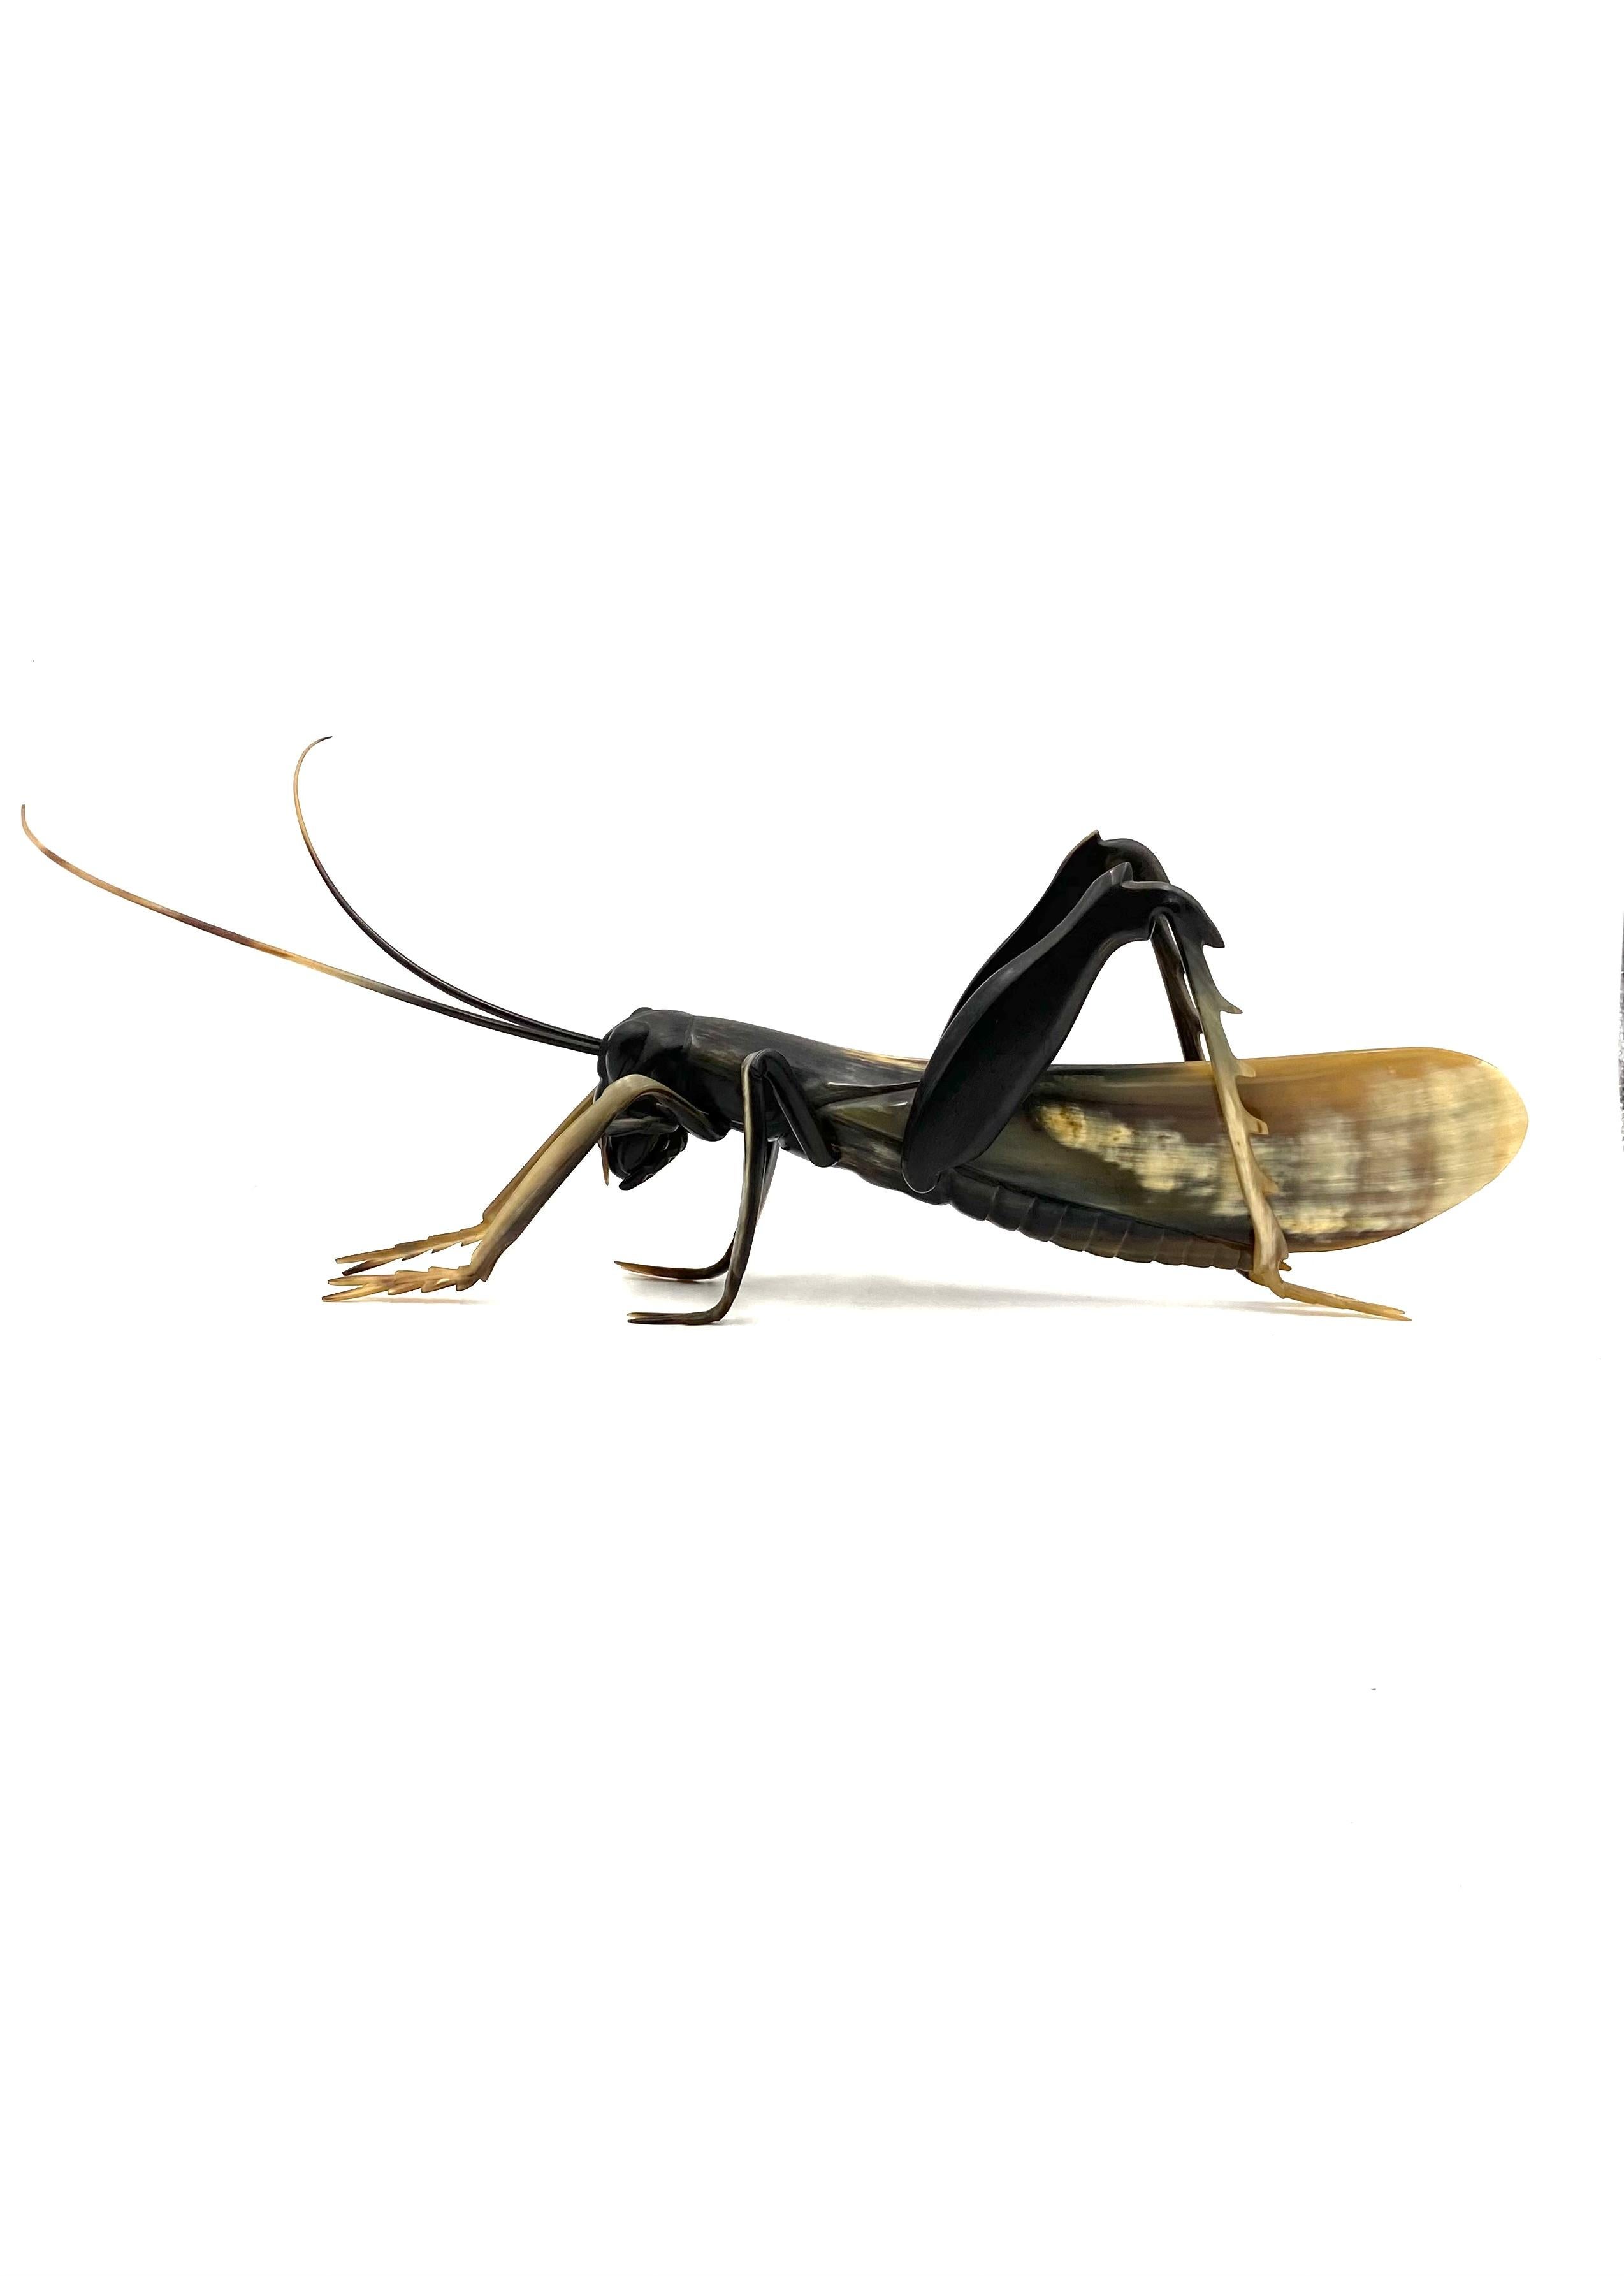 Unique piece. Hand-crafted Grasshopper figure made with natural horn.

Rarely seen item. Great hand.

France 1960s

Measures: H 19 cm - 55 x 15 cm

Conditions: excellent, no defects no dents no missing parts.